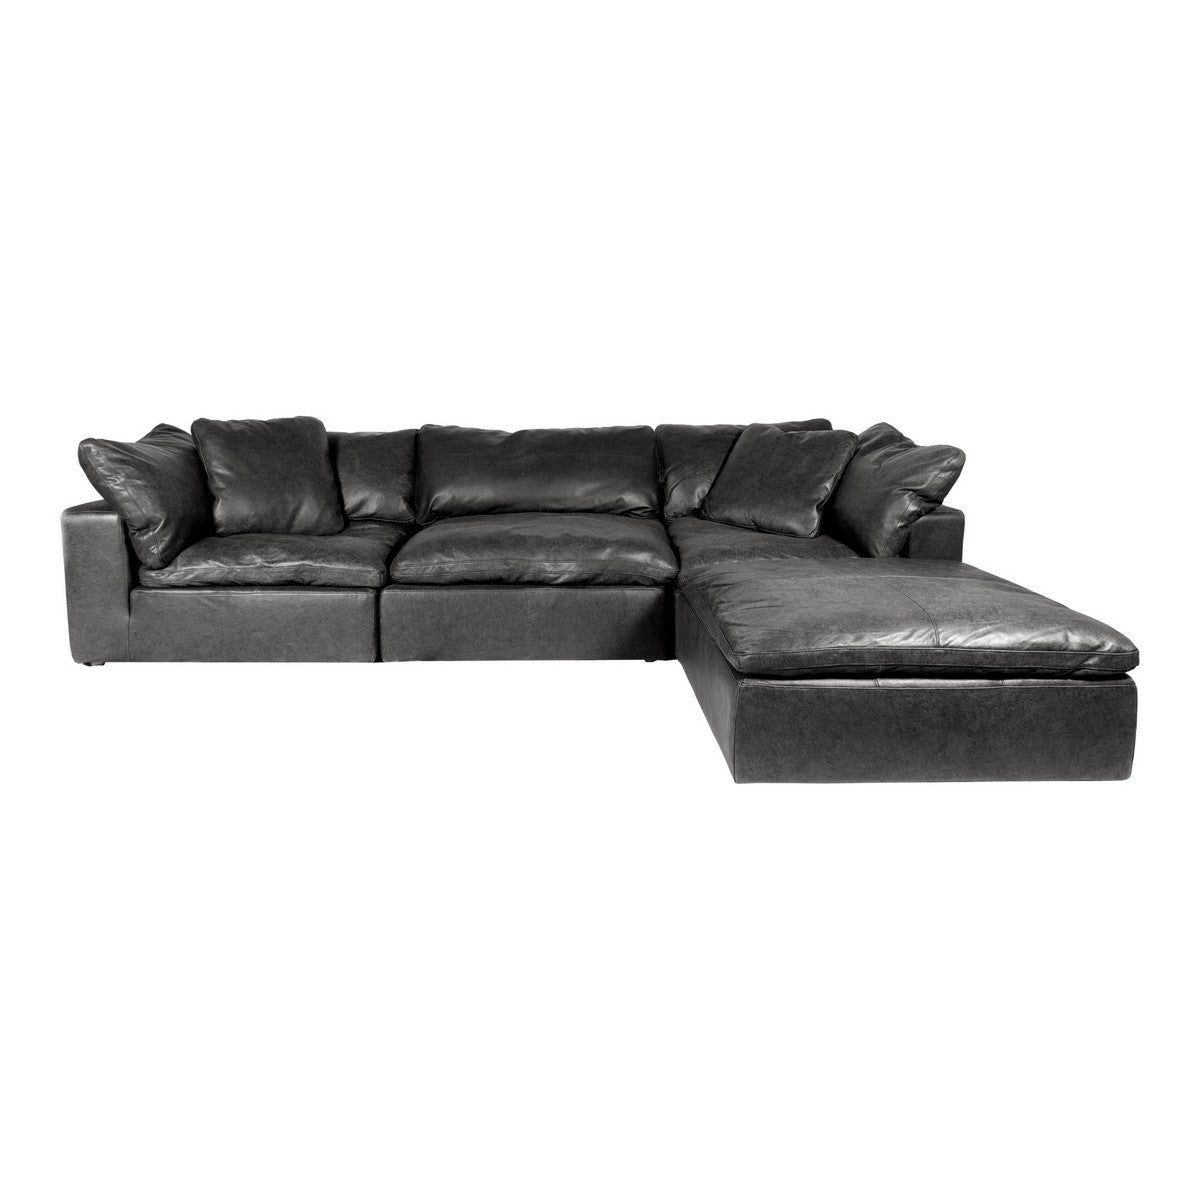 Moe's Home Collection Clay Lounge Modular Sectional Nubuck Leather Black - YJ-1008-02 - Moe's Home Collection - Extras - Minimal And Modern - 1